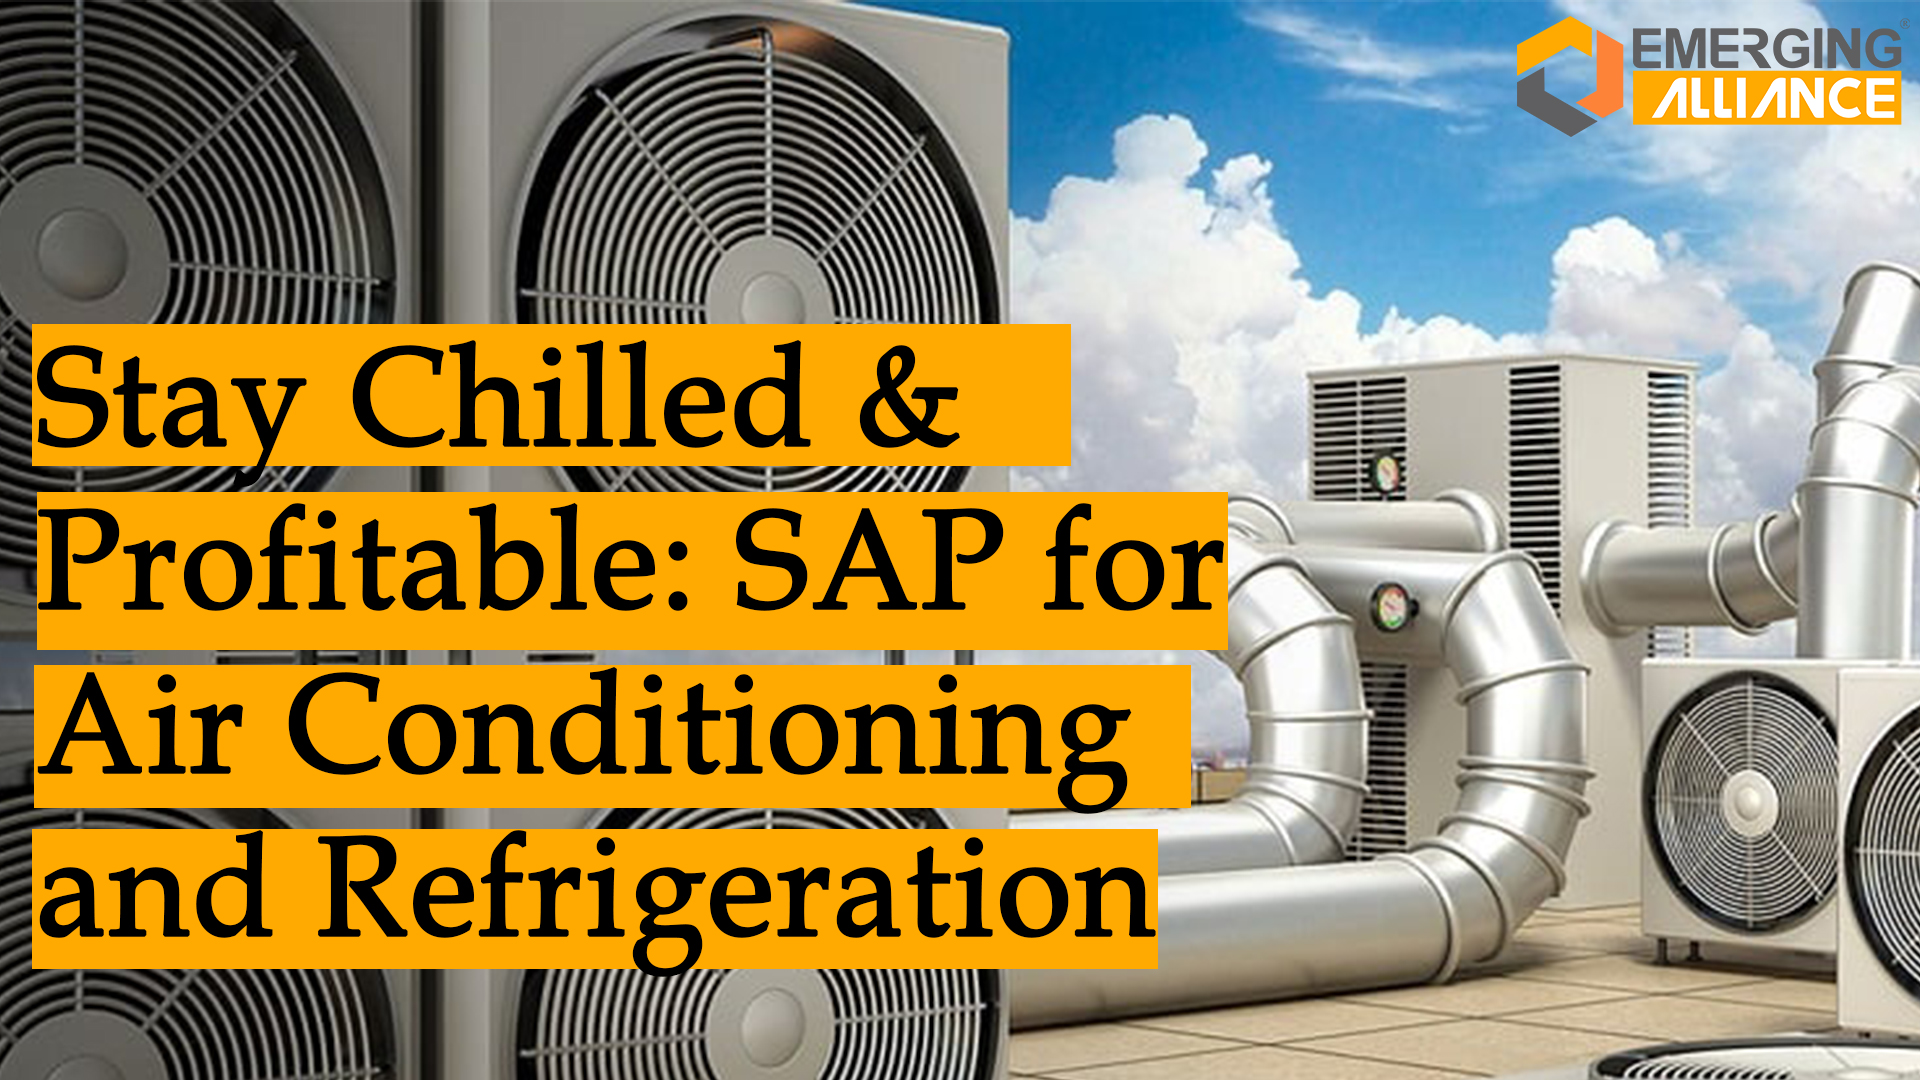 SAP Software for Air Conditioning & Refrigeration